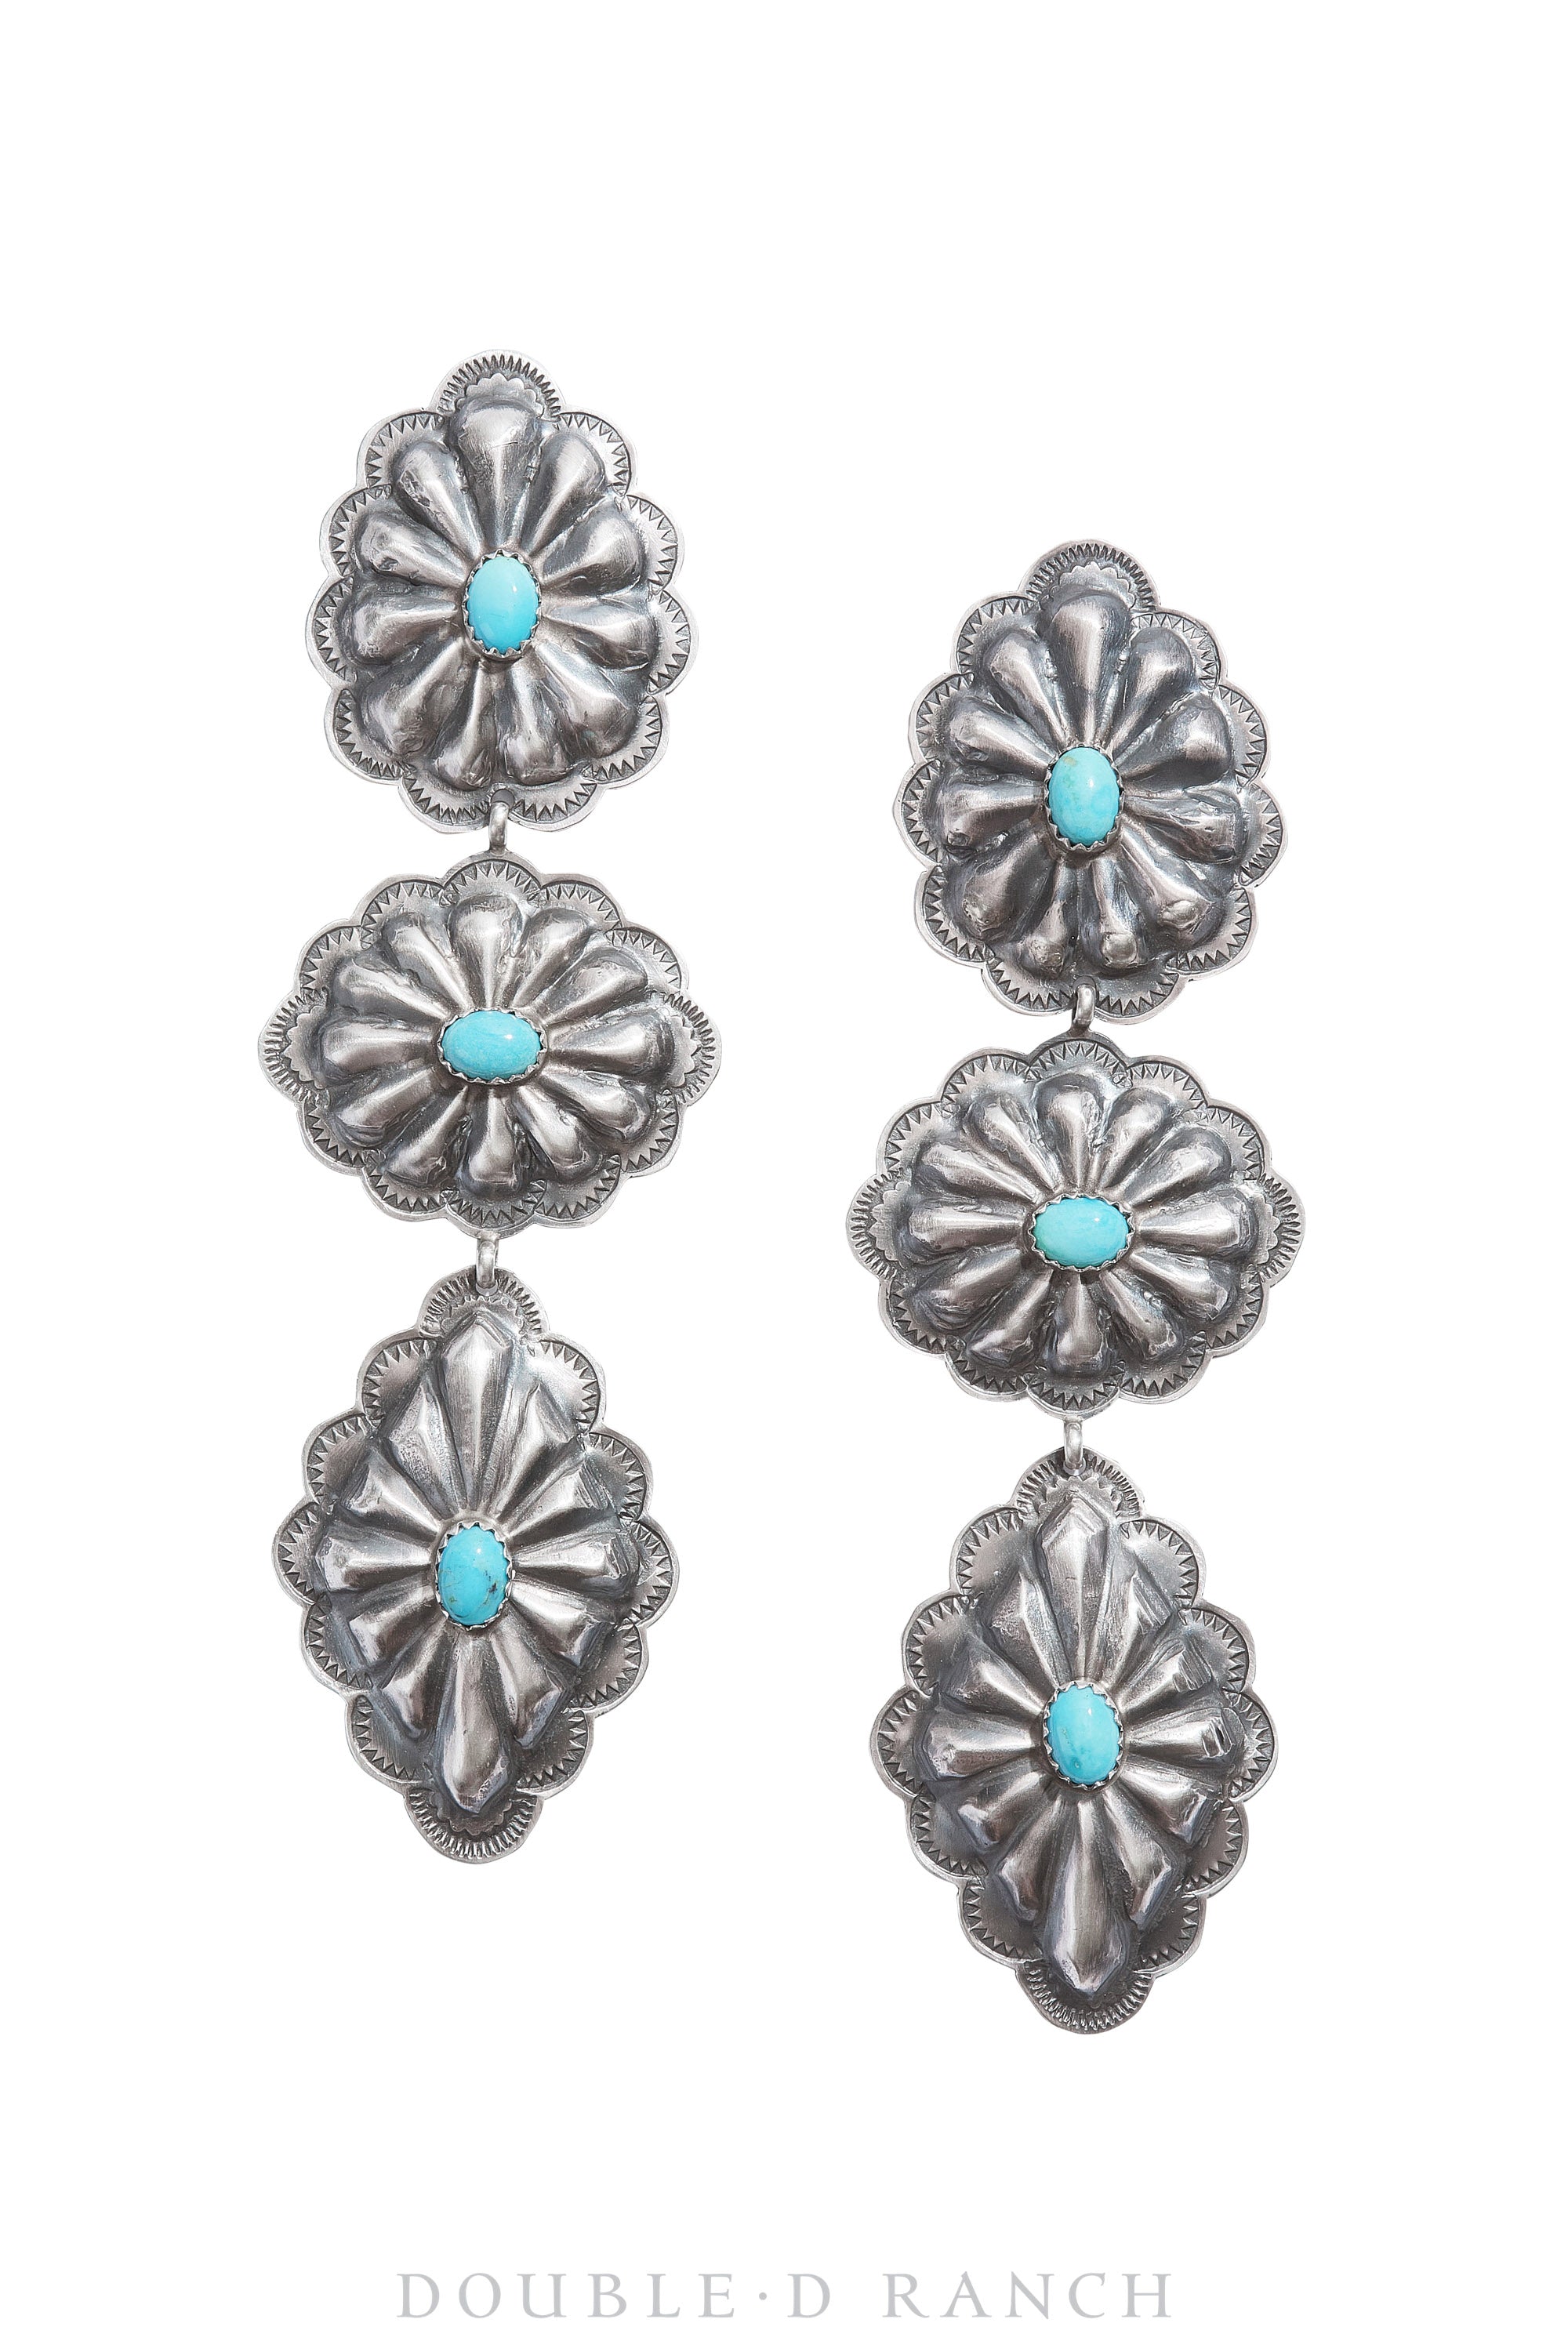 Earrings, Concho, Turquoise, Hallmark, Contemporary, 1148